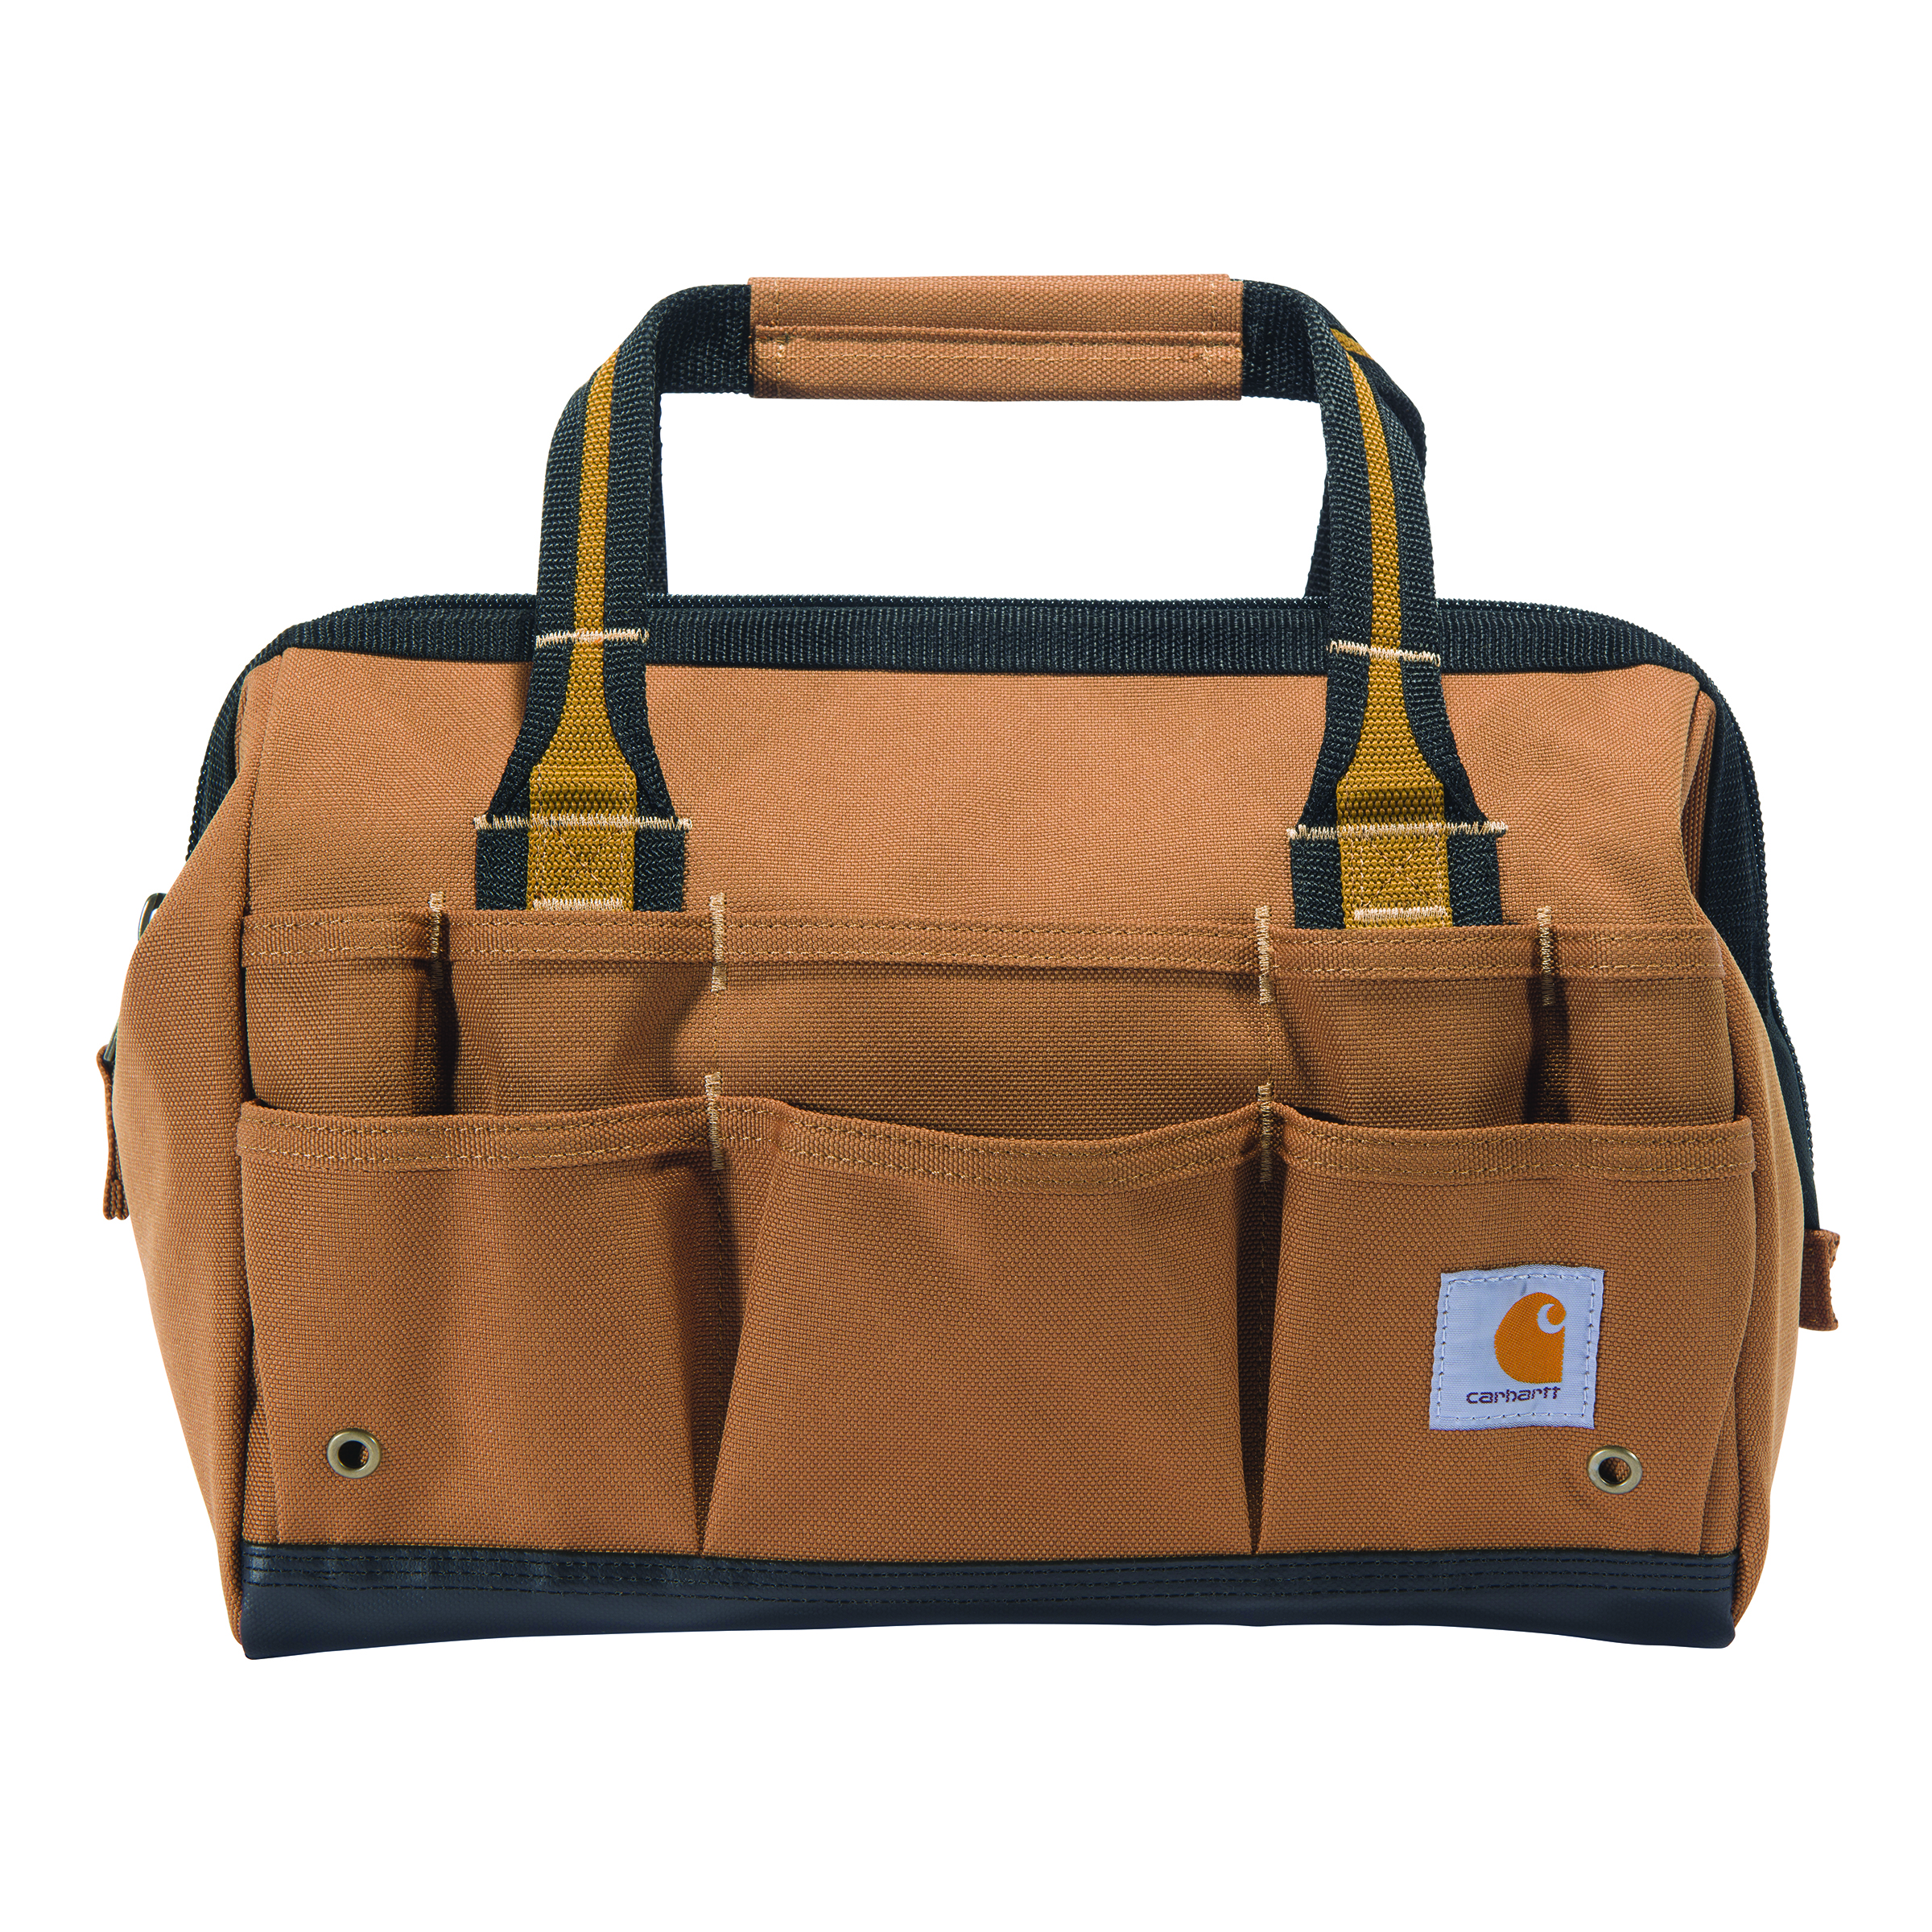 Picture of Carhartt B0000351 Mens 14-Inch 25 Pocket Heavyweight Tool Bag